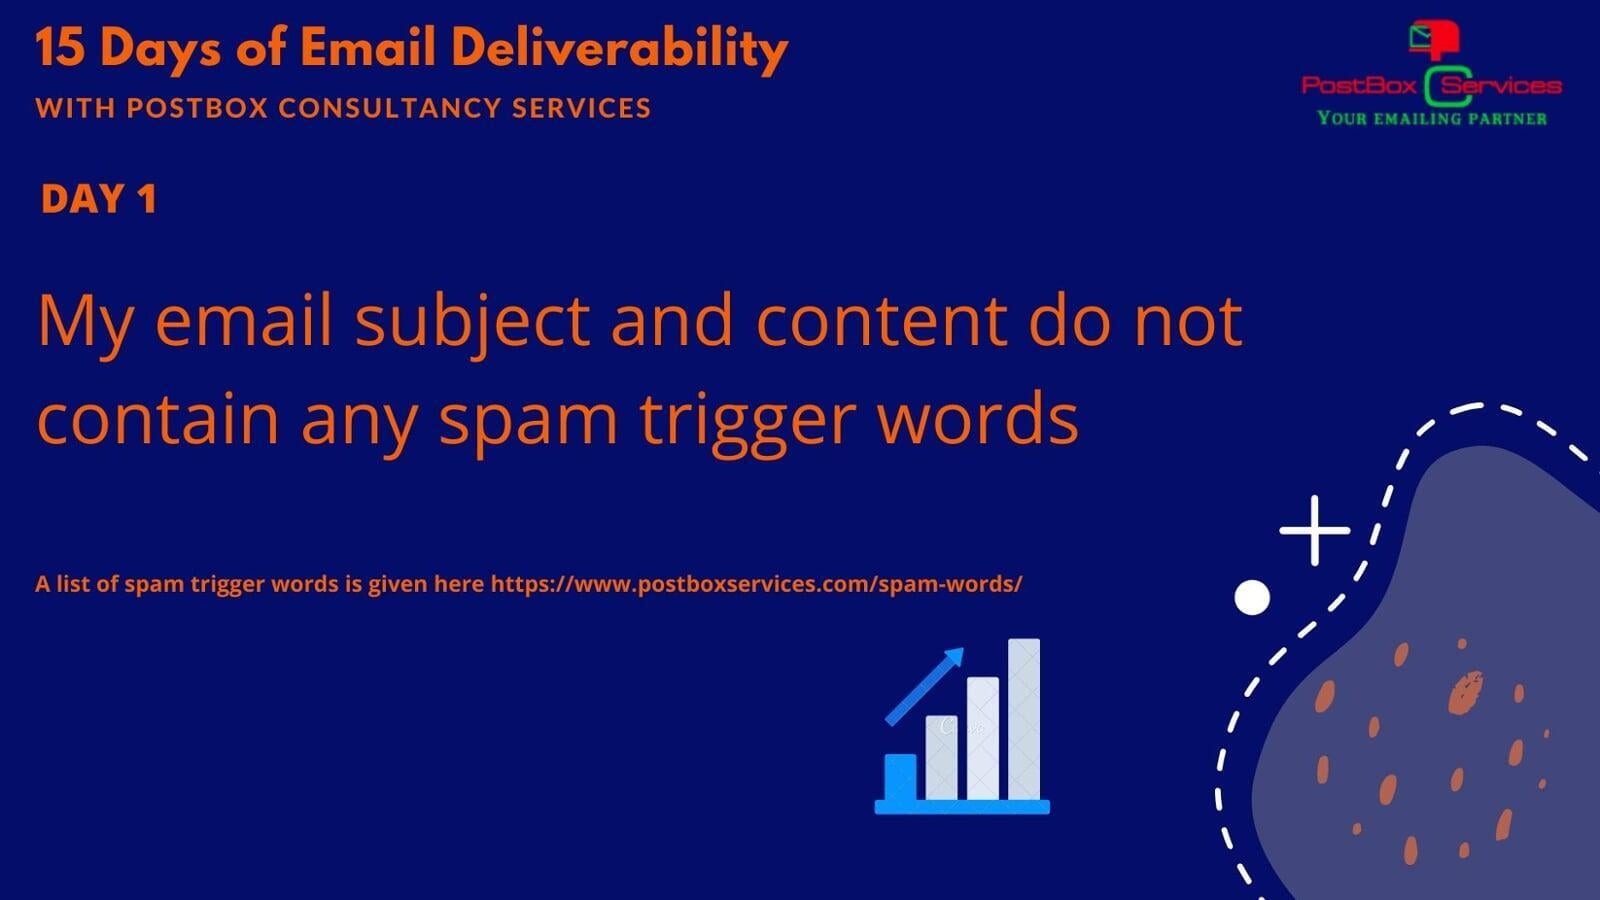 Day 1 Email Deliverability